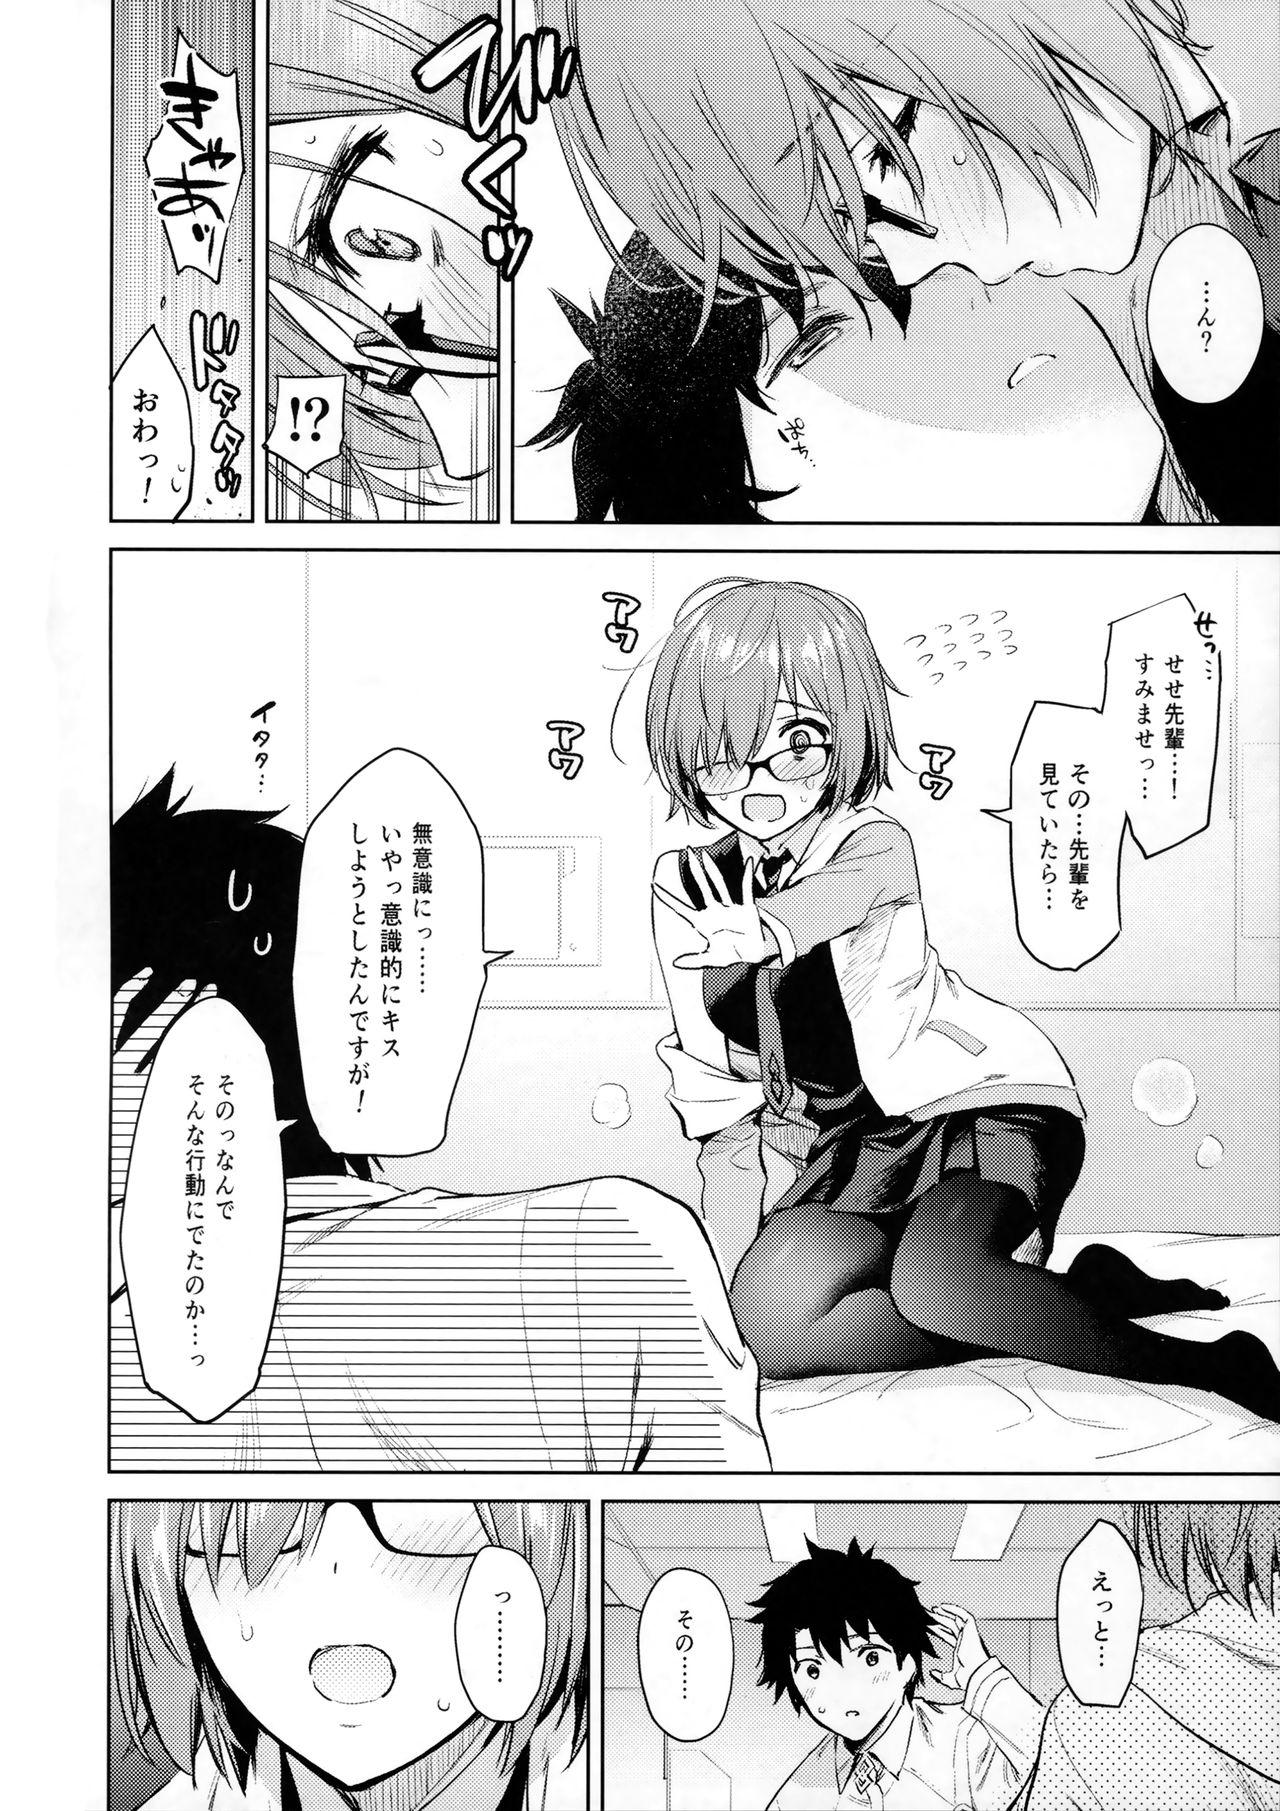 Stepdaughter MASH, HORNY, MASH - Fate grand order Stepfamily - Page 5